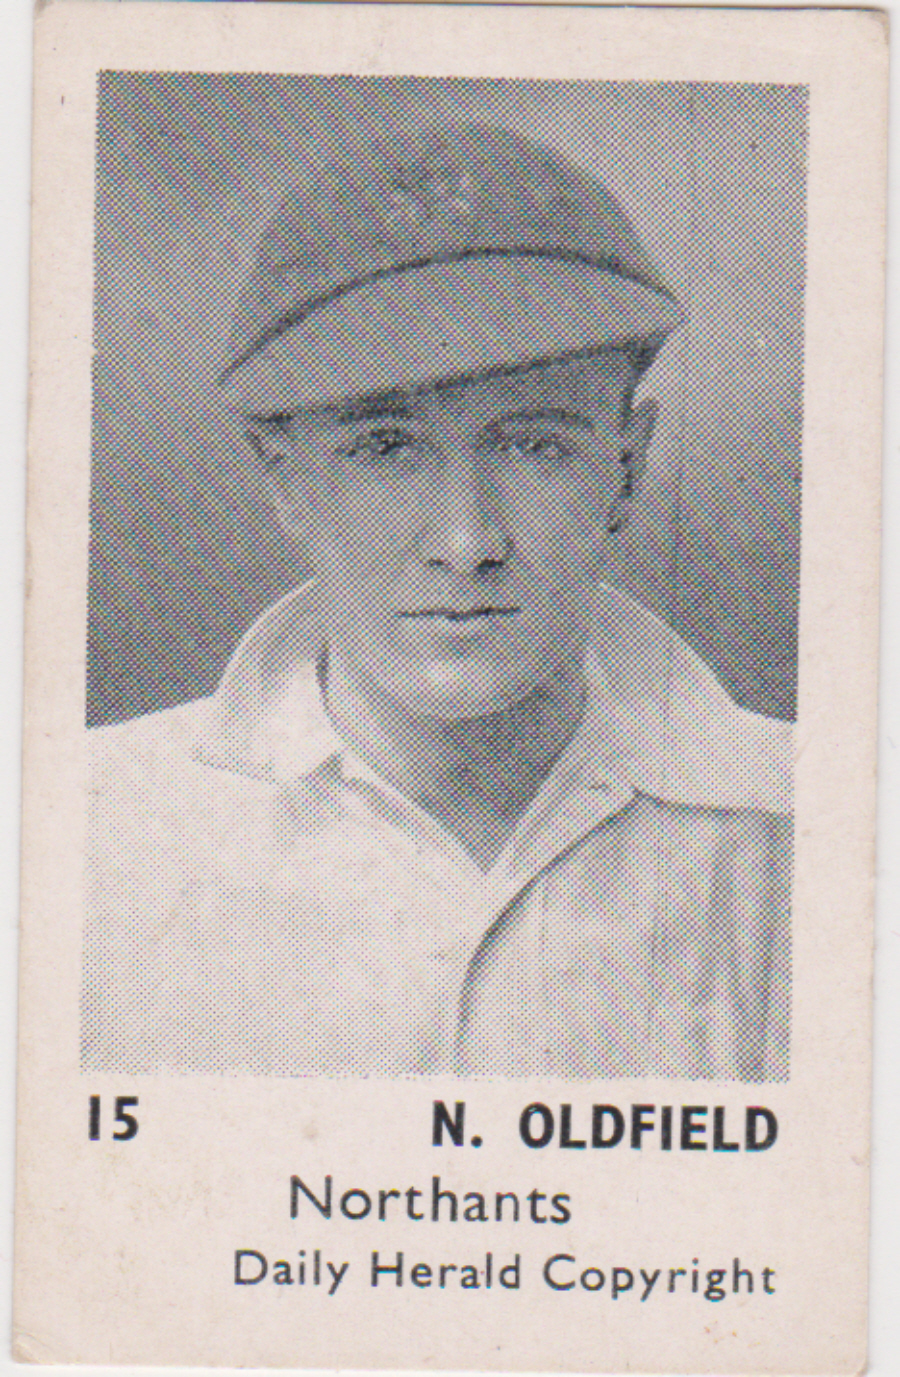 Daily Herald Cricketers No15 N Oldfield - Click Image to Close